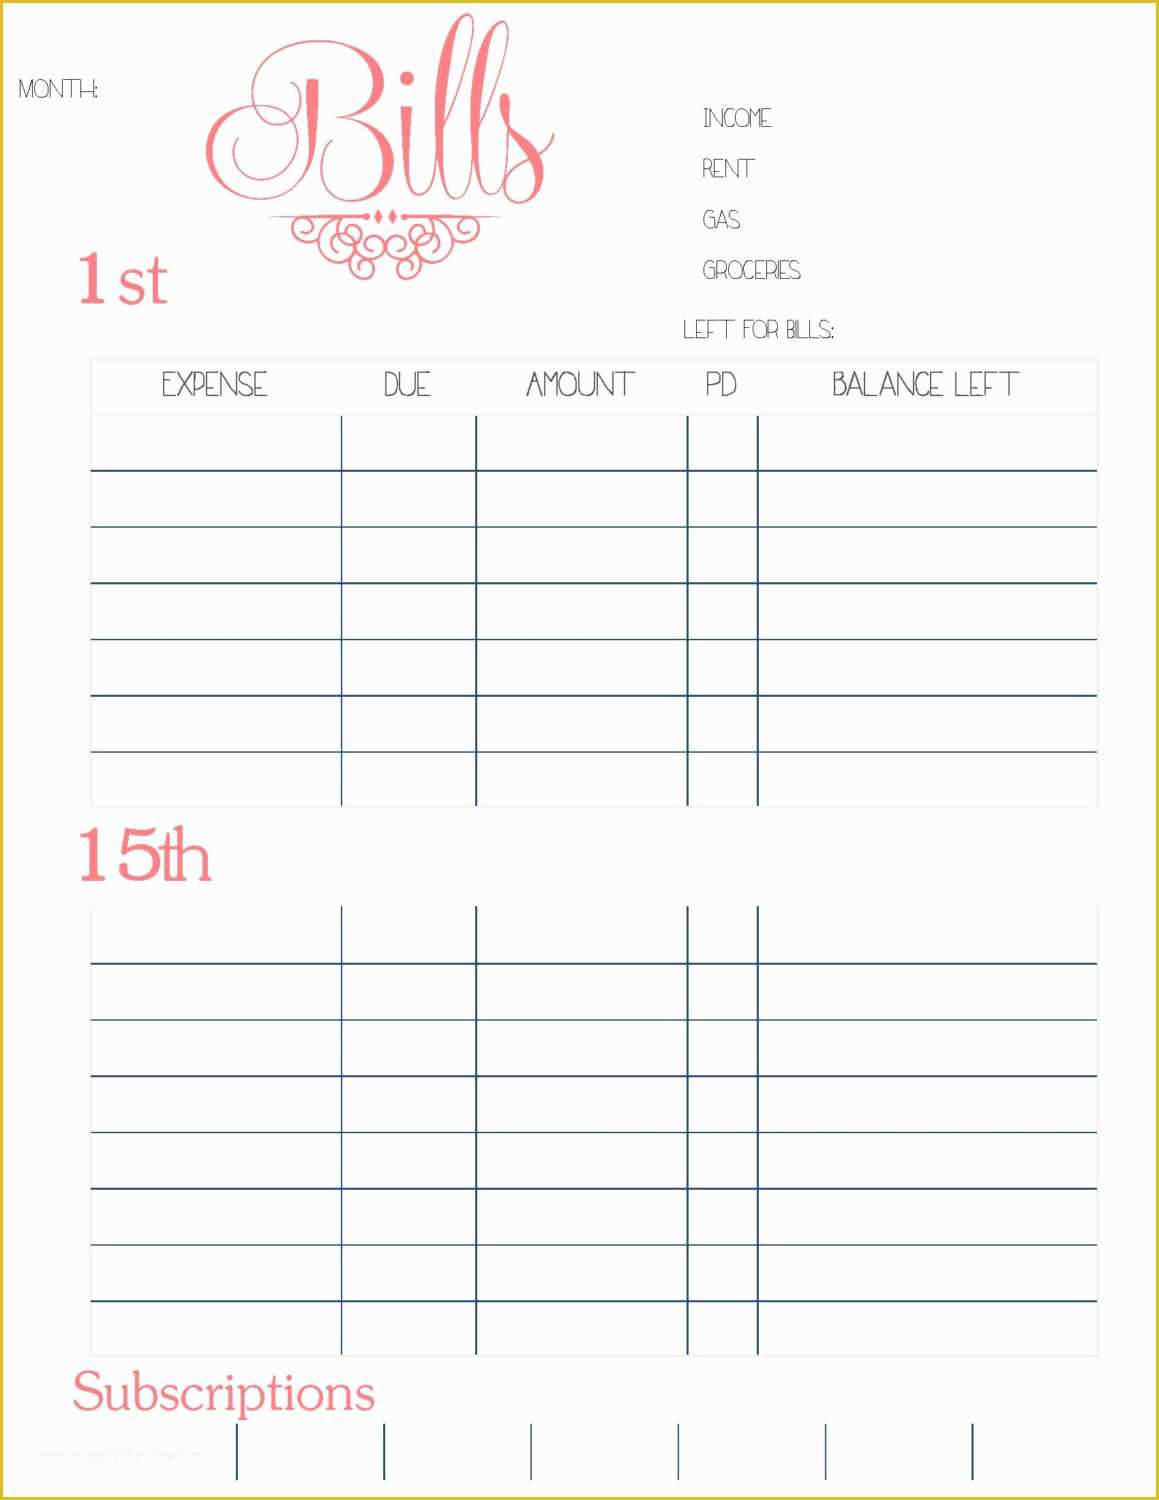 Free Monthly Bill Planner Template Of 9 Best Of Free Printable Weekly Bill Planner Bill